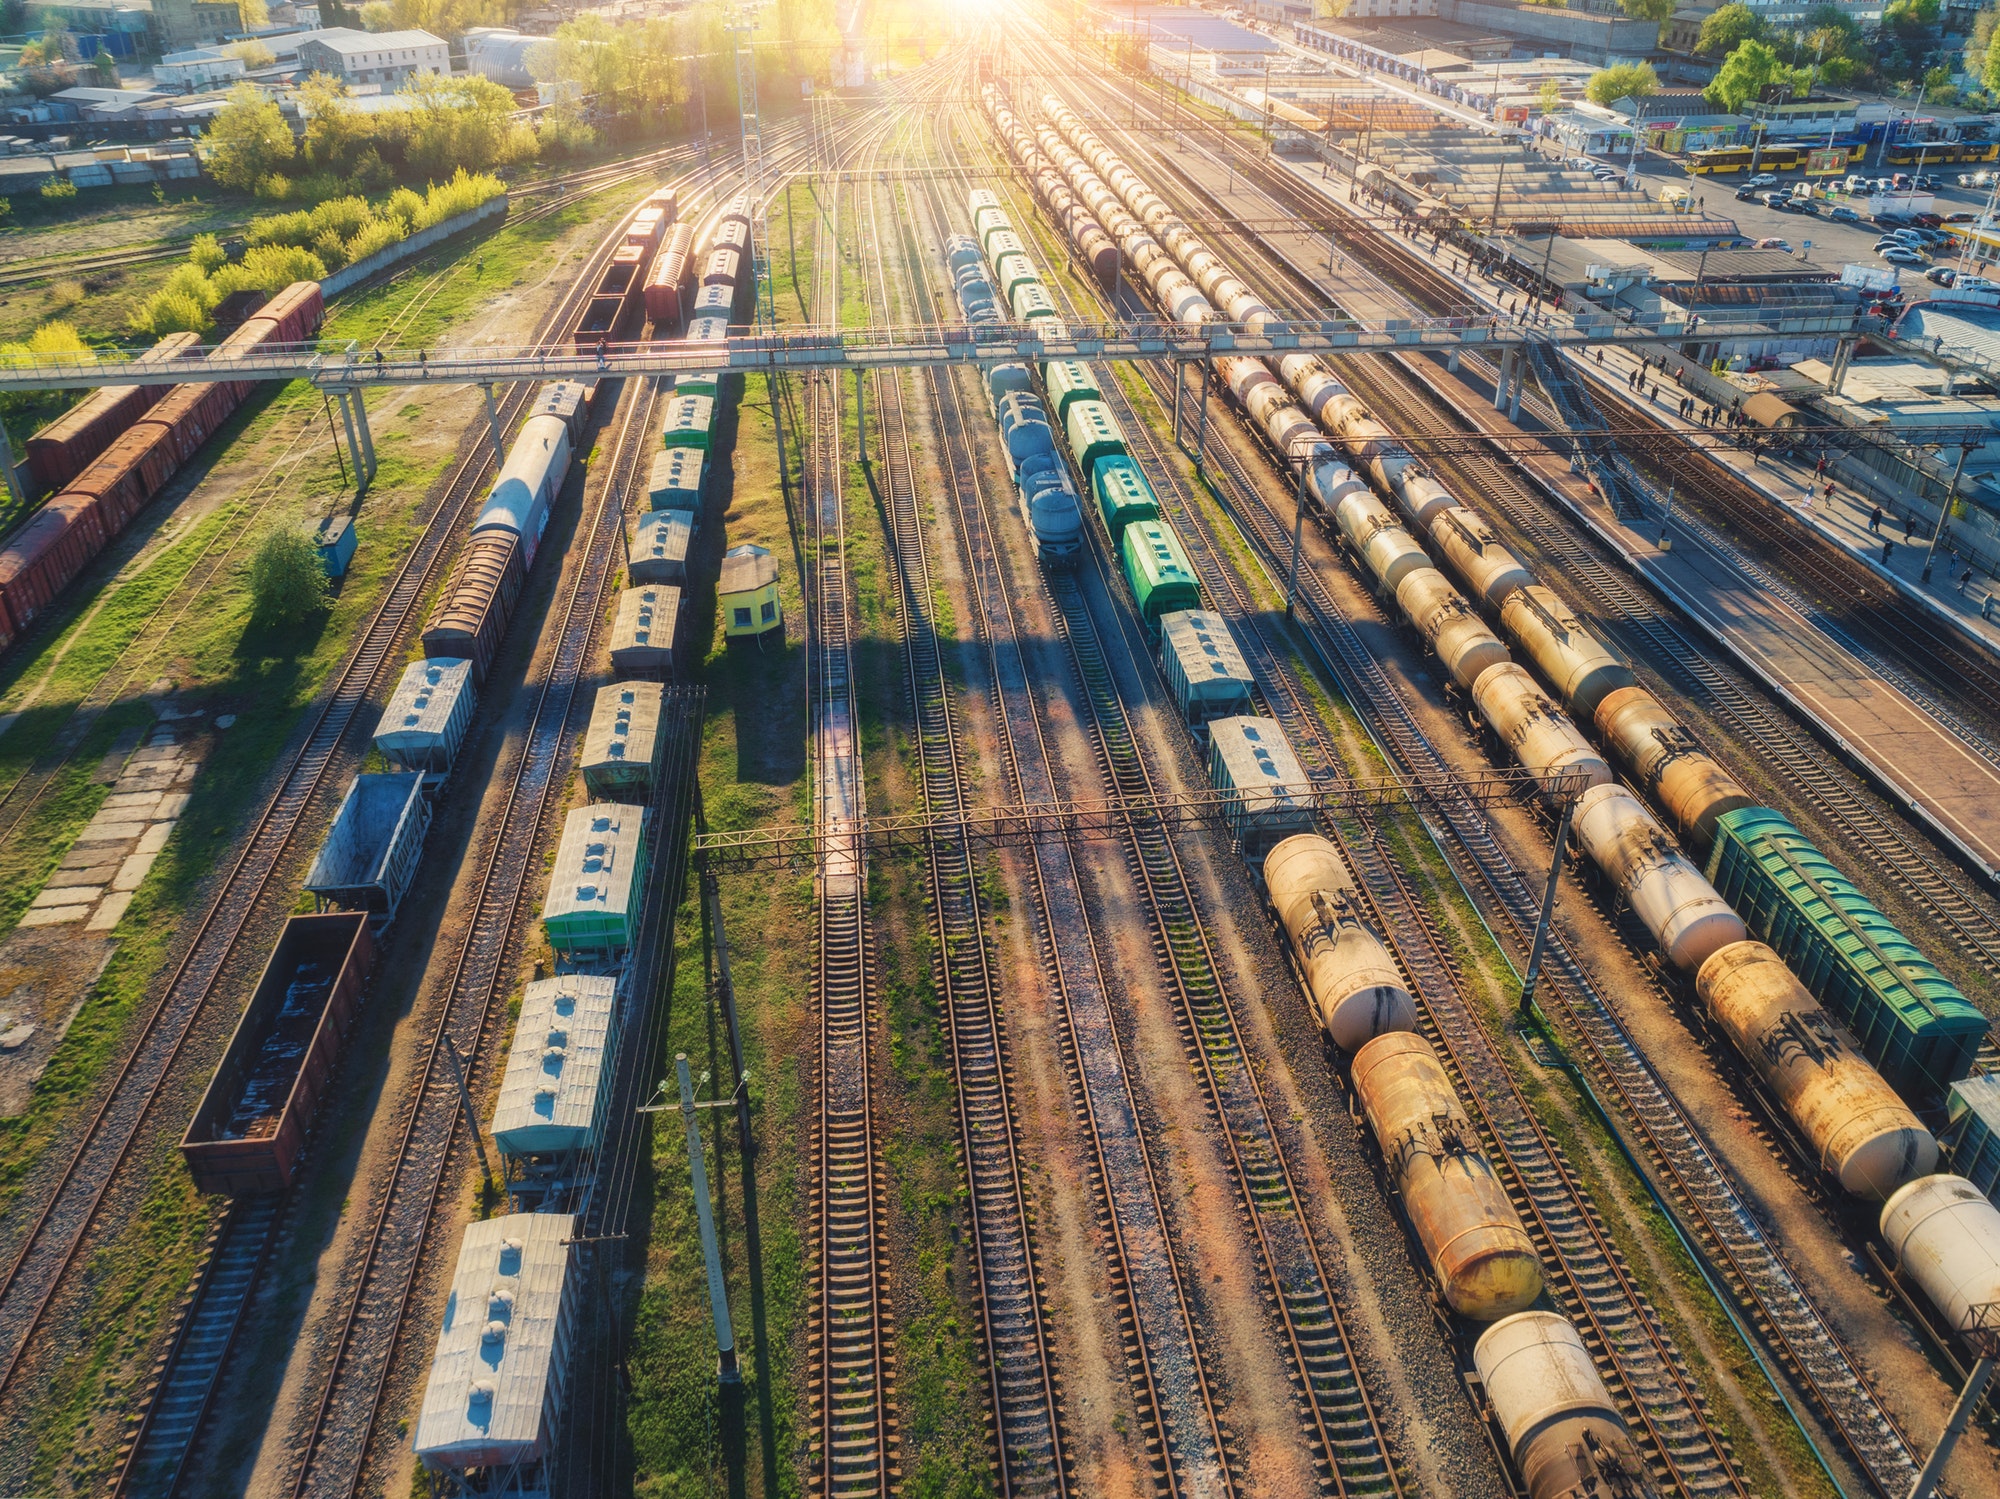 Aerial view of colorful freight trains on railroad